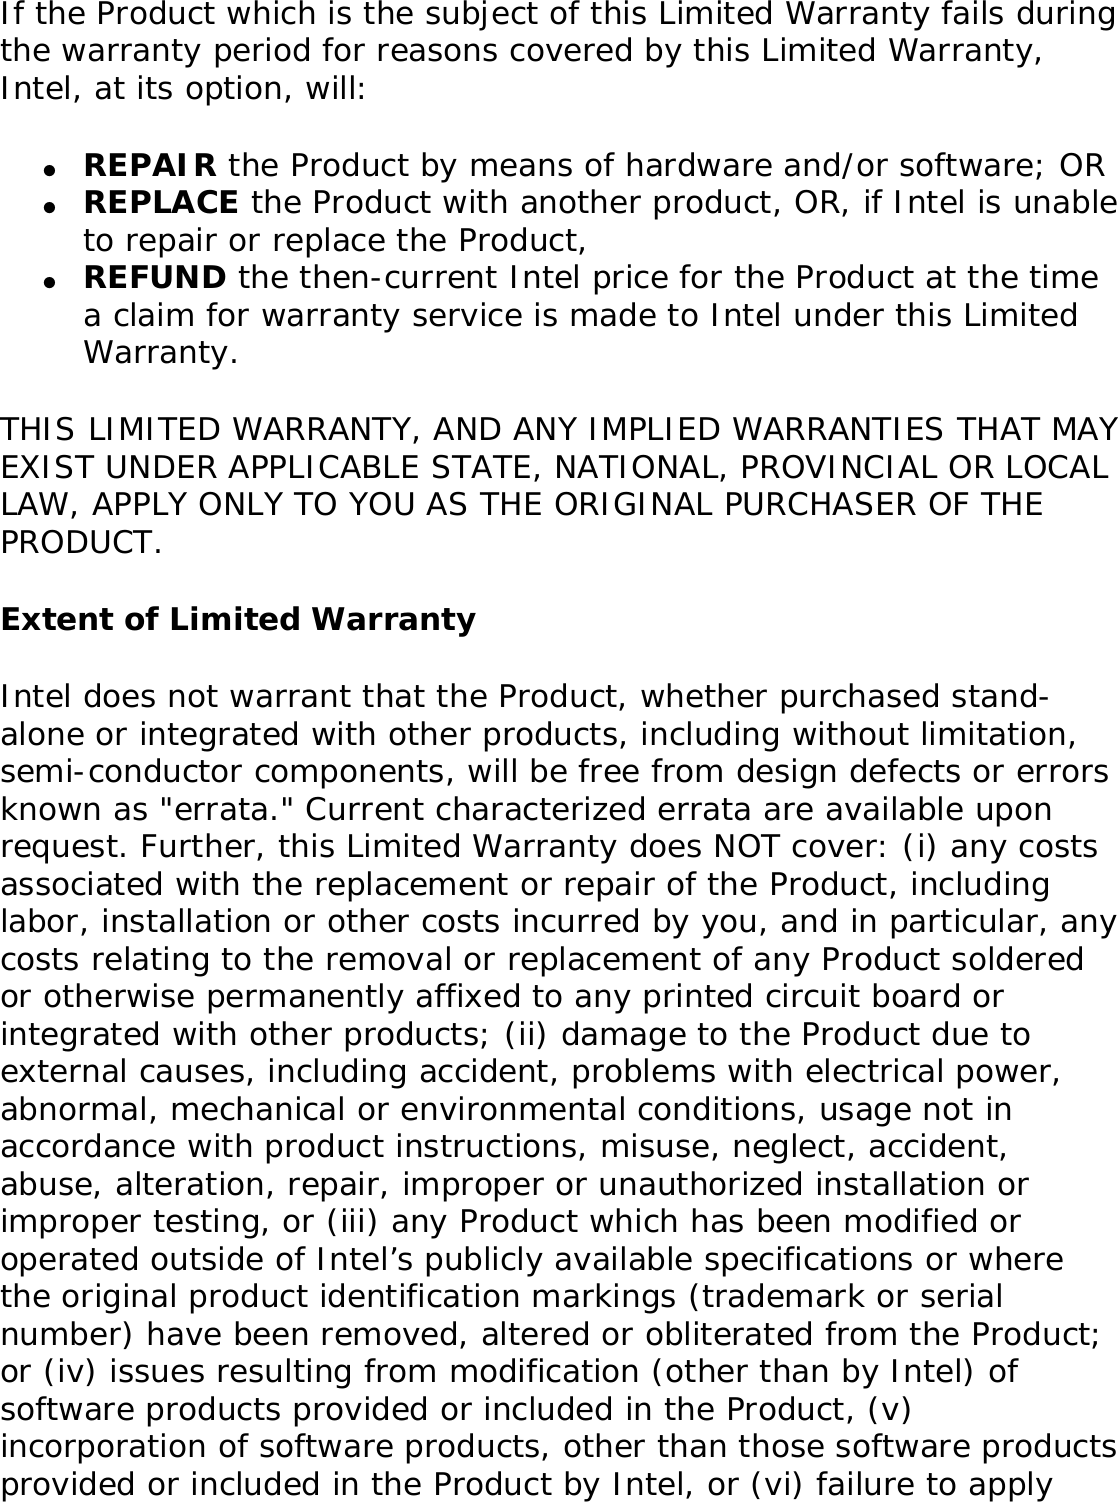 Back to ContentsWarranty: Intel(R) PRO/Wireless 3945ABG Network Connection User GuideProduct Warranty InformationOne-Year Limited Hardware WarrantyLimited WarrantyIntel warrants to the purchaser of the Intel(R) PRO/Wireless 3945ABG Network Connection PCI Card (the “Product”), that the Product, if properly used and installed, will be free from defects in material and workmanship and will substantially conform to Intel’s publicly available specifications for the Product for a period of one (1) year beginning on the date the Product was purchased in its original sealed packaging.SOFTWARE OF ANY KIND DELIVERED WITH OR AS PART OF THE PRODUCT IS EXPRESSLY PROVIDED &quot;AS IS&quot;, SPECIFICALLY EXCLUDING ALL OTHER WARRANTIES, EXPRESS, IMPLIED (INCLUDING WITHOUT LIMITATION, WARRANTIES OF MERCHANTABILITY, NON-INFRINGEMENT OR FITNESS FOR A PARTICULAR PURPOSE), provided however, that Intel warrants that the media on which the software is furnished will be free from defects for a period of ninety (90) days from the date of delivery. If such a defect appears within the warranty period, you may return the defective media to Intel for replacement or alternative delivery of the software at Intel&apos;s discretion and without charge. Intel does not warrant or assume responsibility for the accuracy or completeness of any information, text, graphics, links or other items contained within the software. 